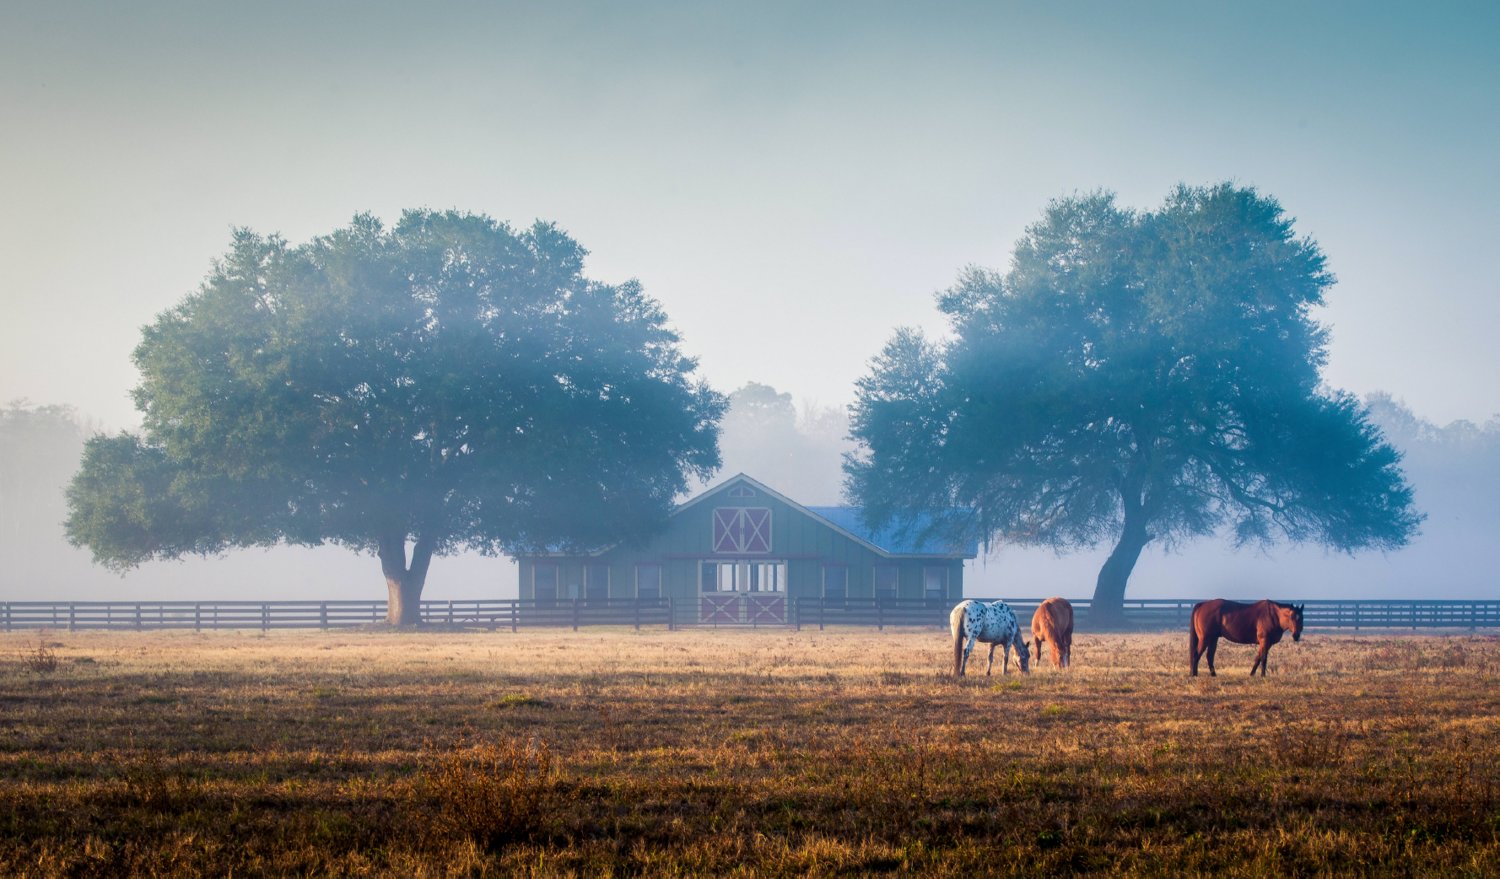 “Pasture Morning” by Paul Coleman